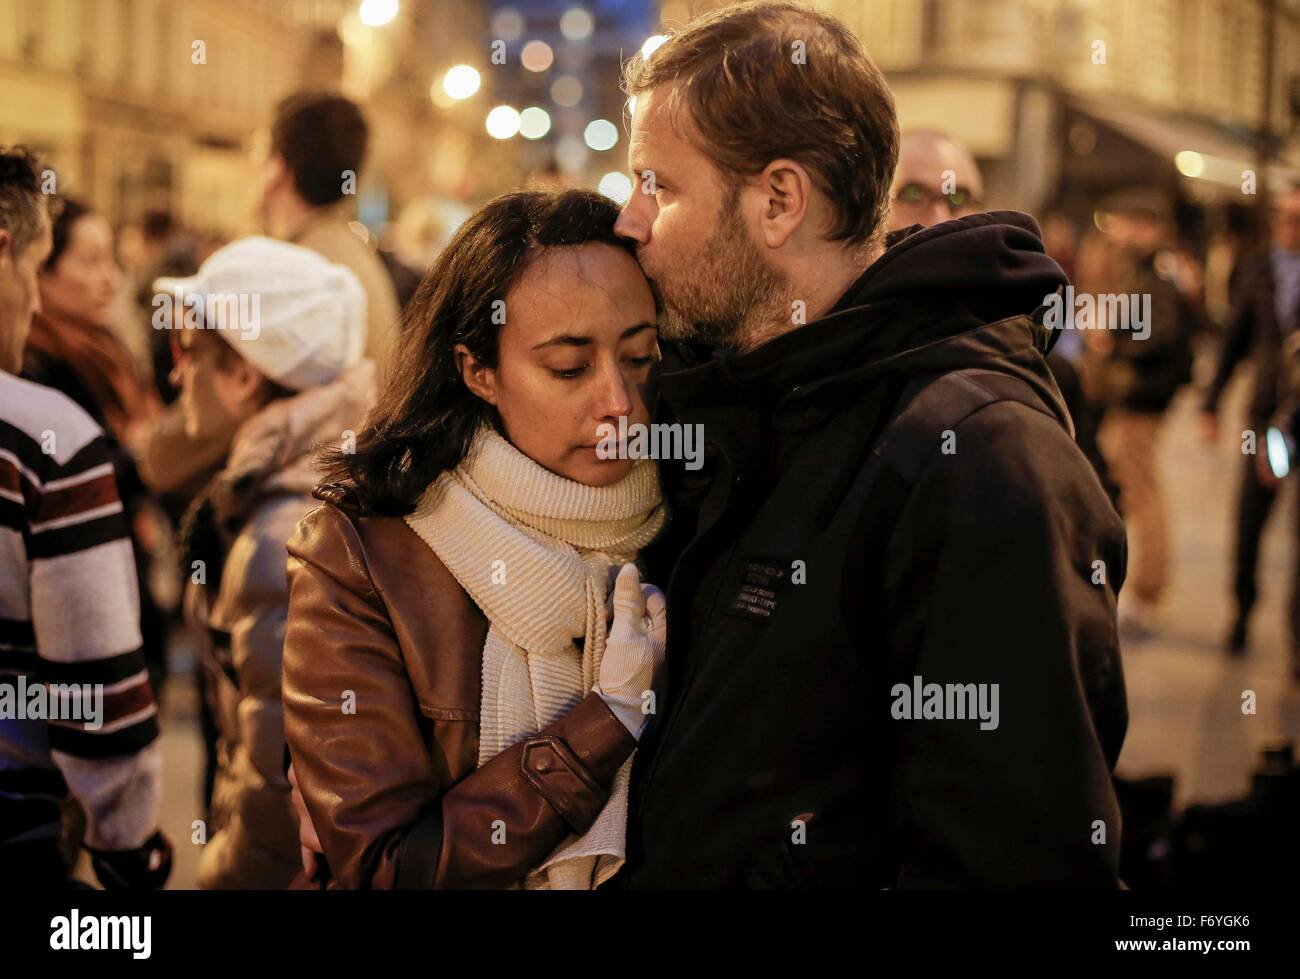 Beijing, France. 14th Nov, 2015. A couple mourns for victims in front of the Le Petit Cambodge Restaurant where a terror attack happend on Nov. 13 in Paris, France, Nov. 14, 2015. © Zhou Lei/Xinhua/Alamy Live News Stock Photo